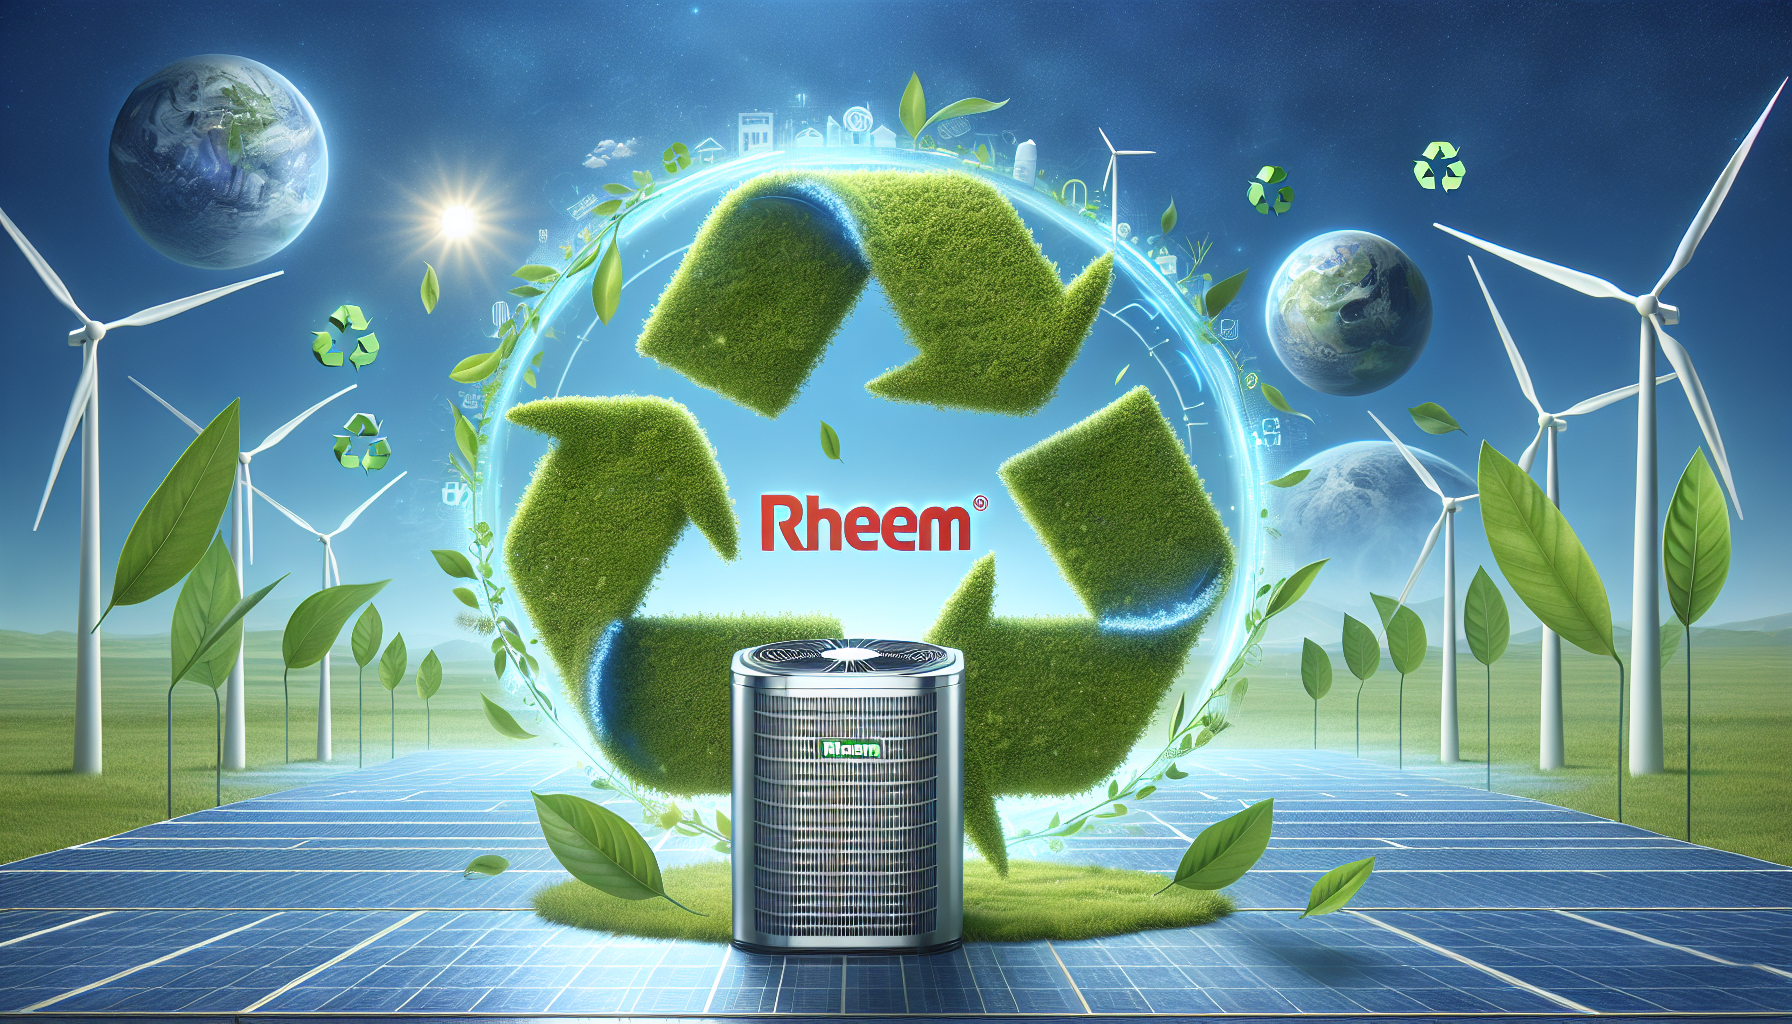 Rheem's commitment to sustainability and innovation